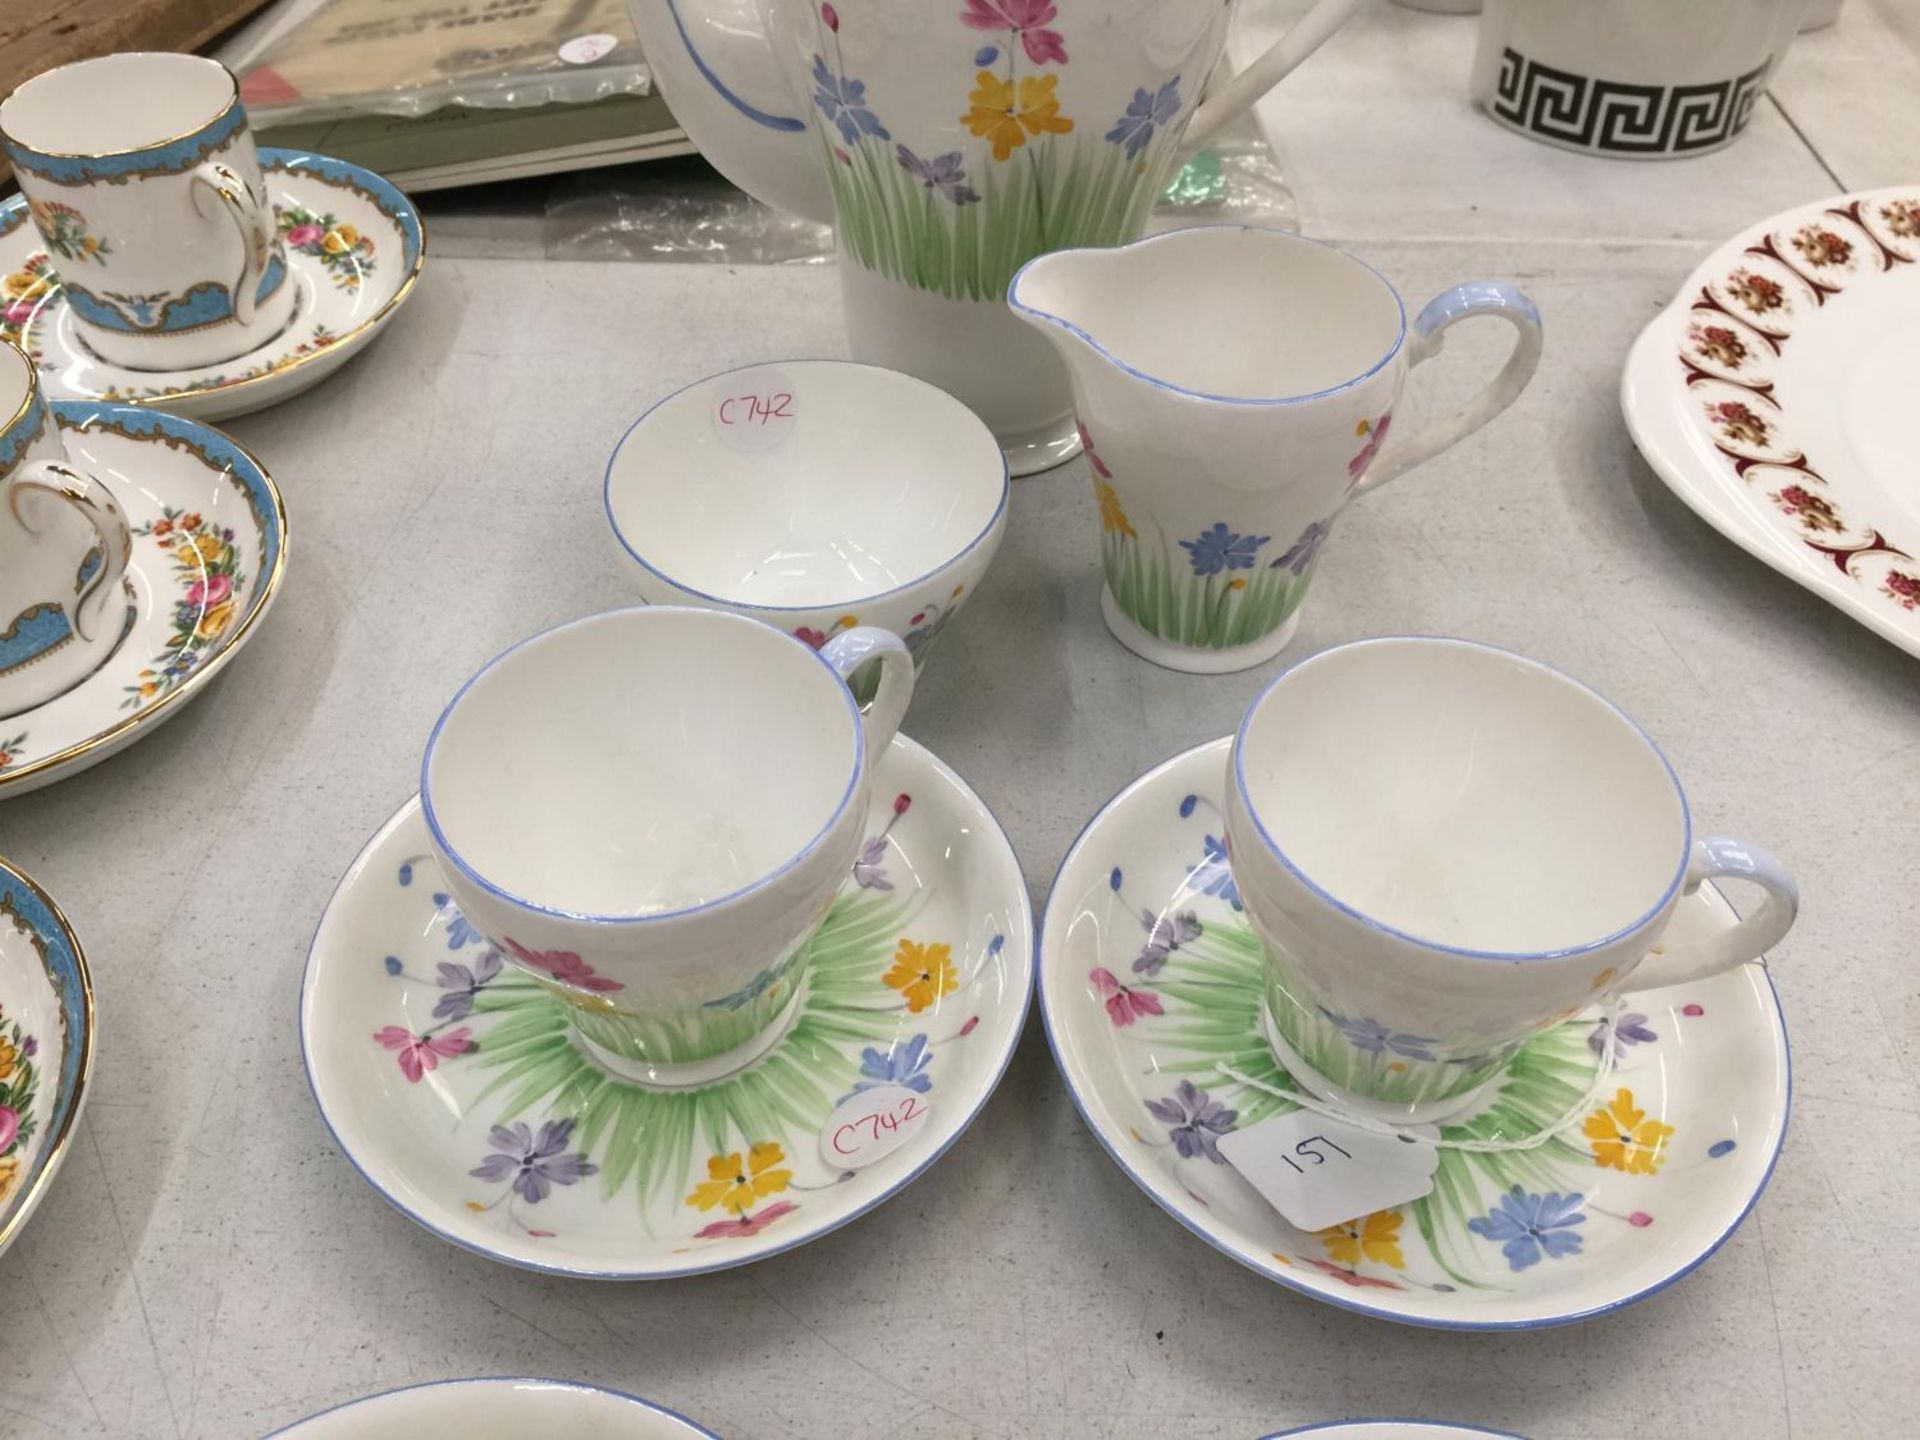 A VINTAGE GRAFTON TEASET WITH FLORAL PATTERN TO INCLUDE TEAPOT, CUPS AND SAUCERS, CREAM JUG AND - Image 3 of 6